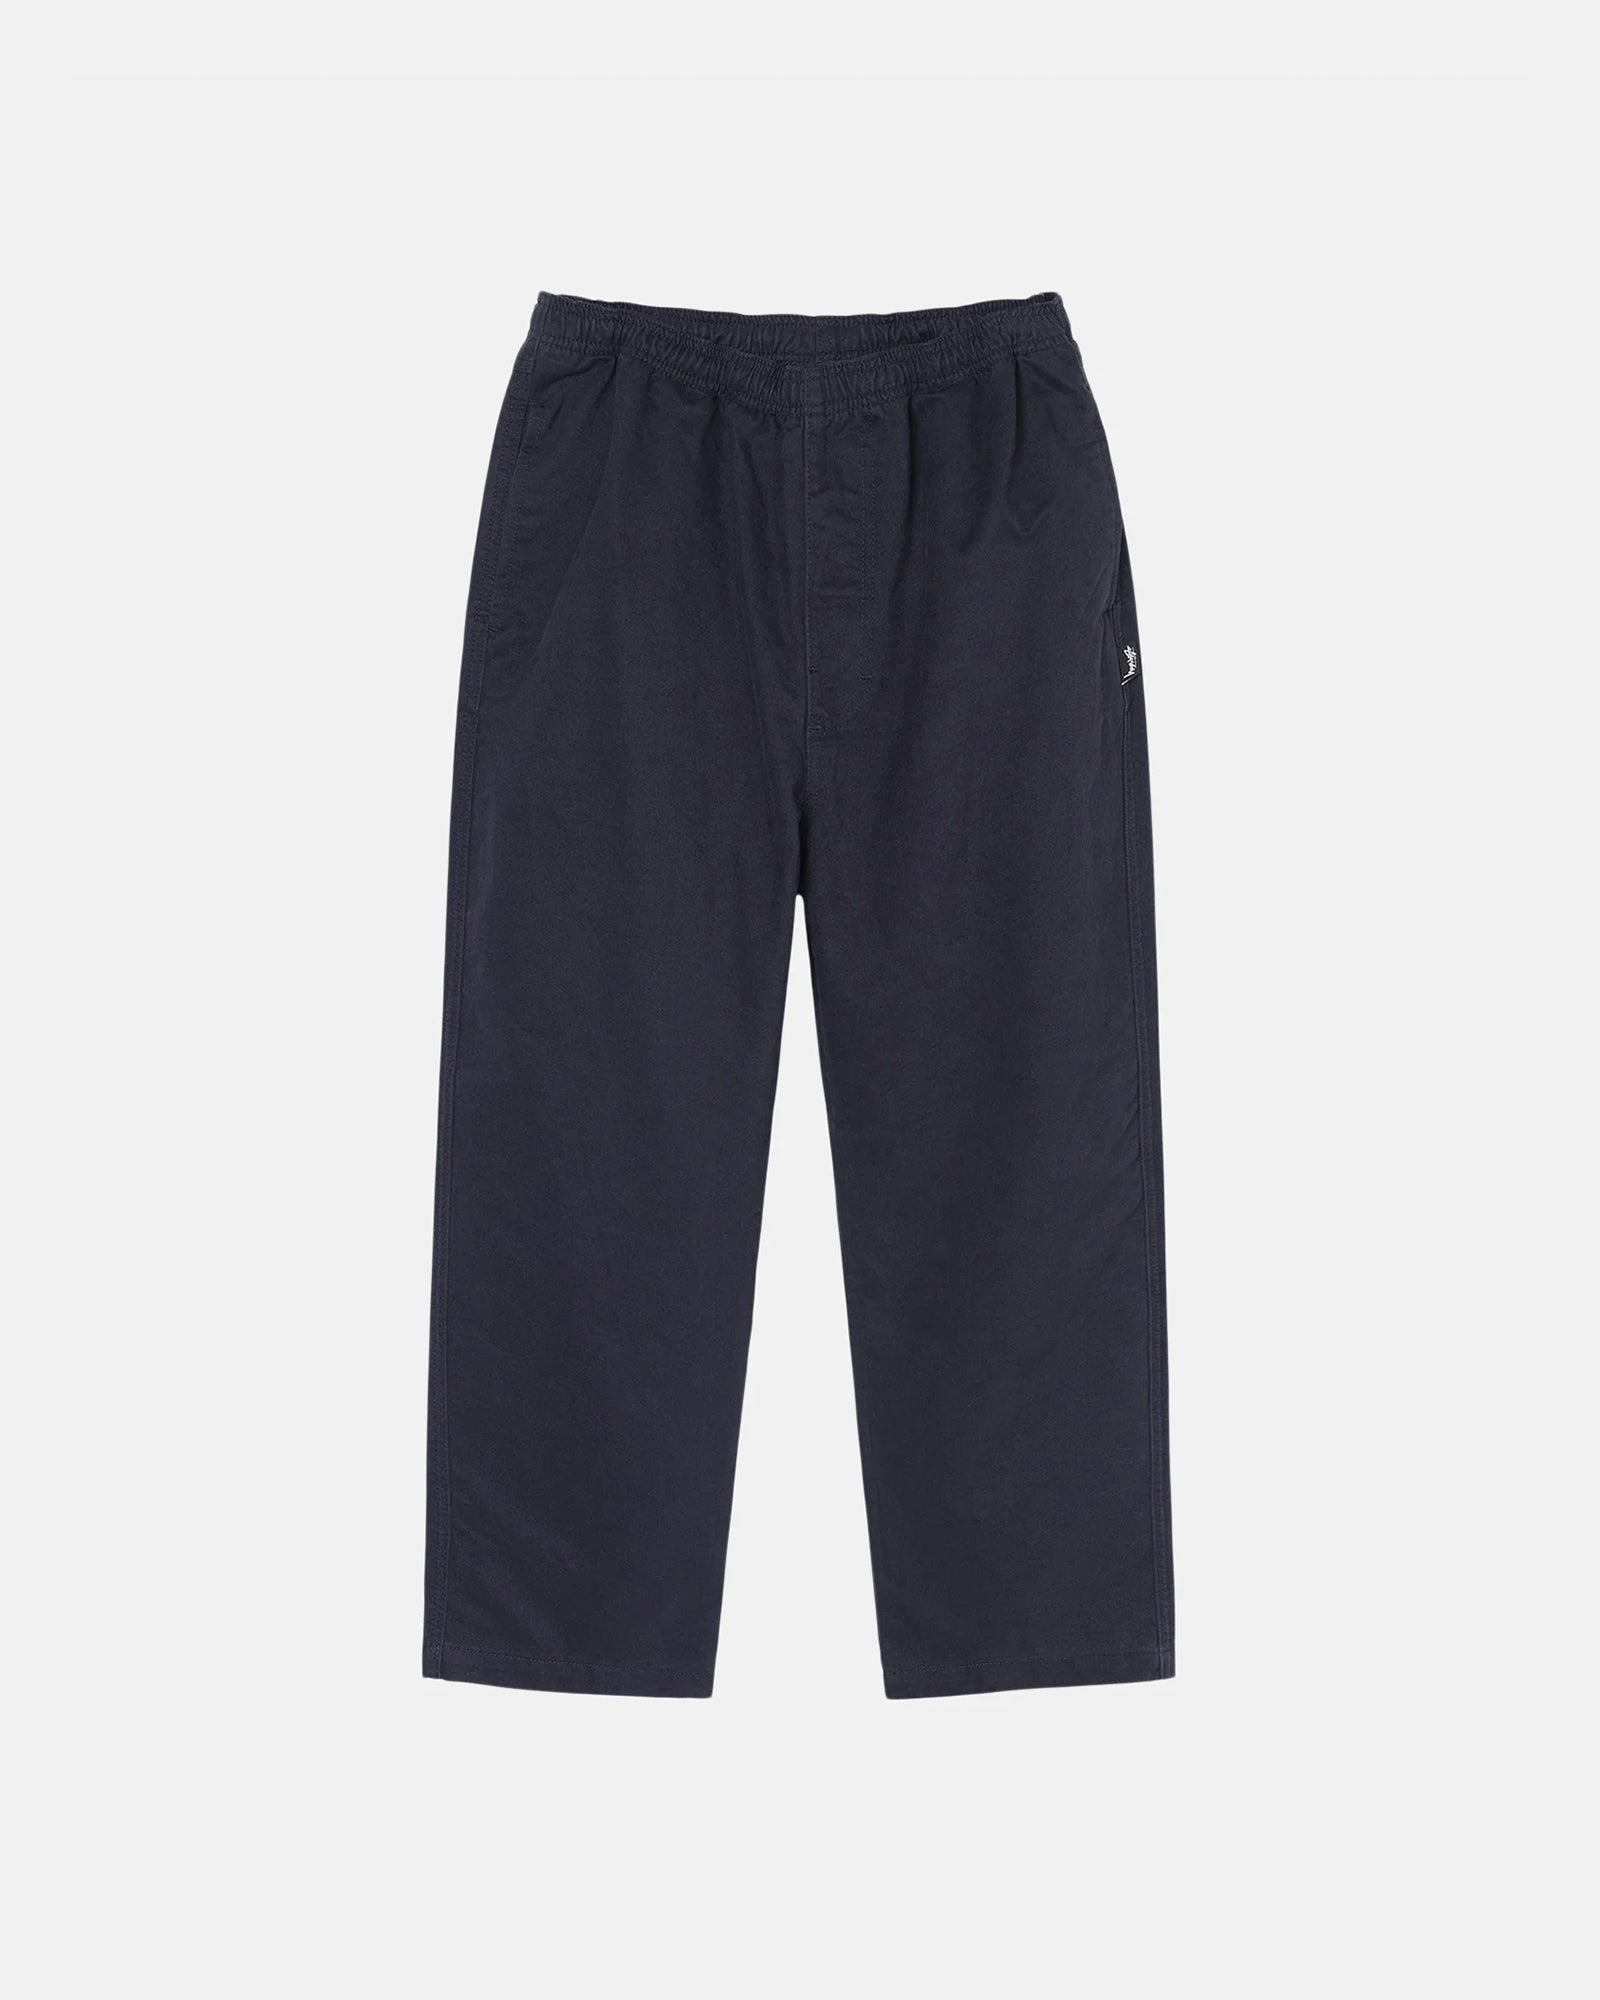 Beach Pant Brushed Cotton in navy – Stüssy